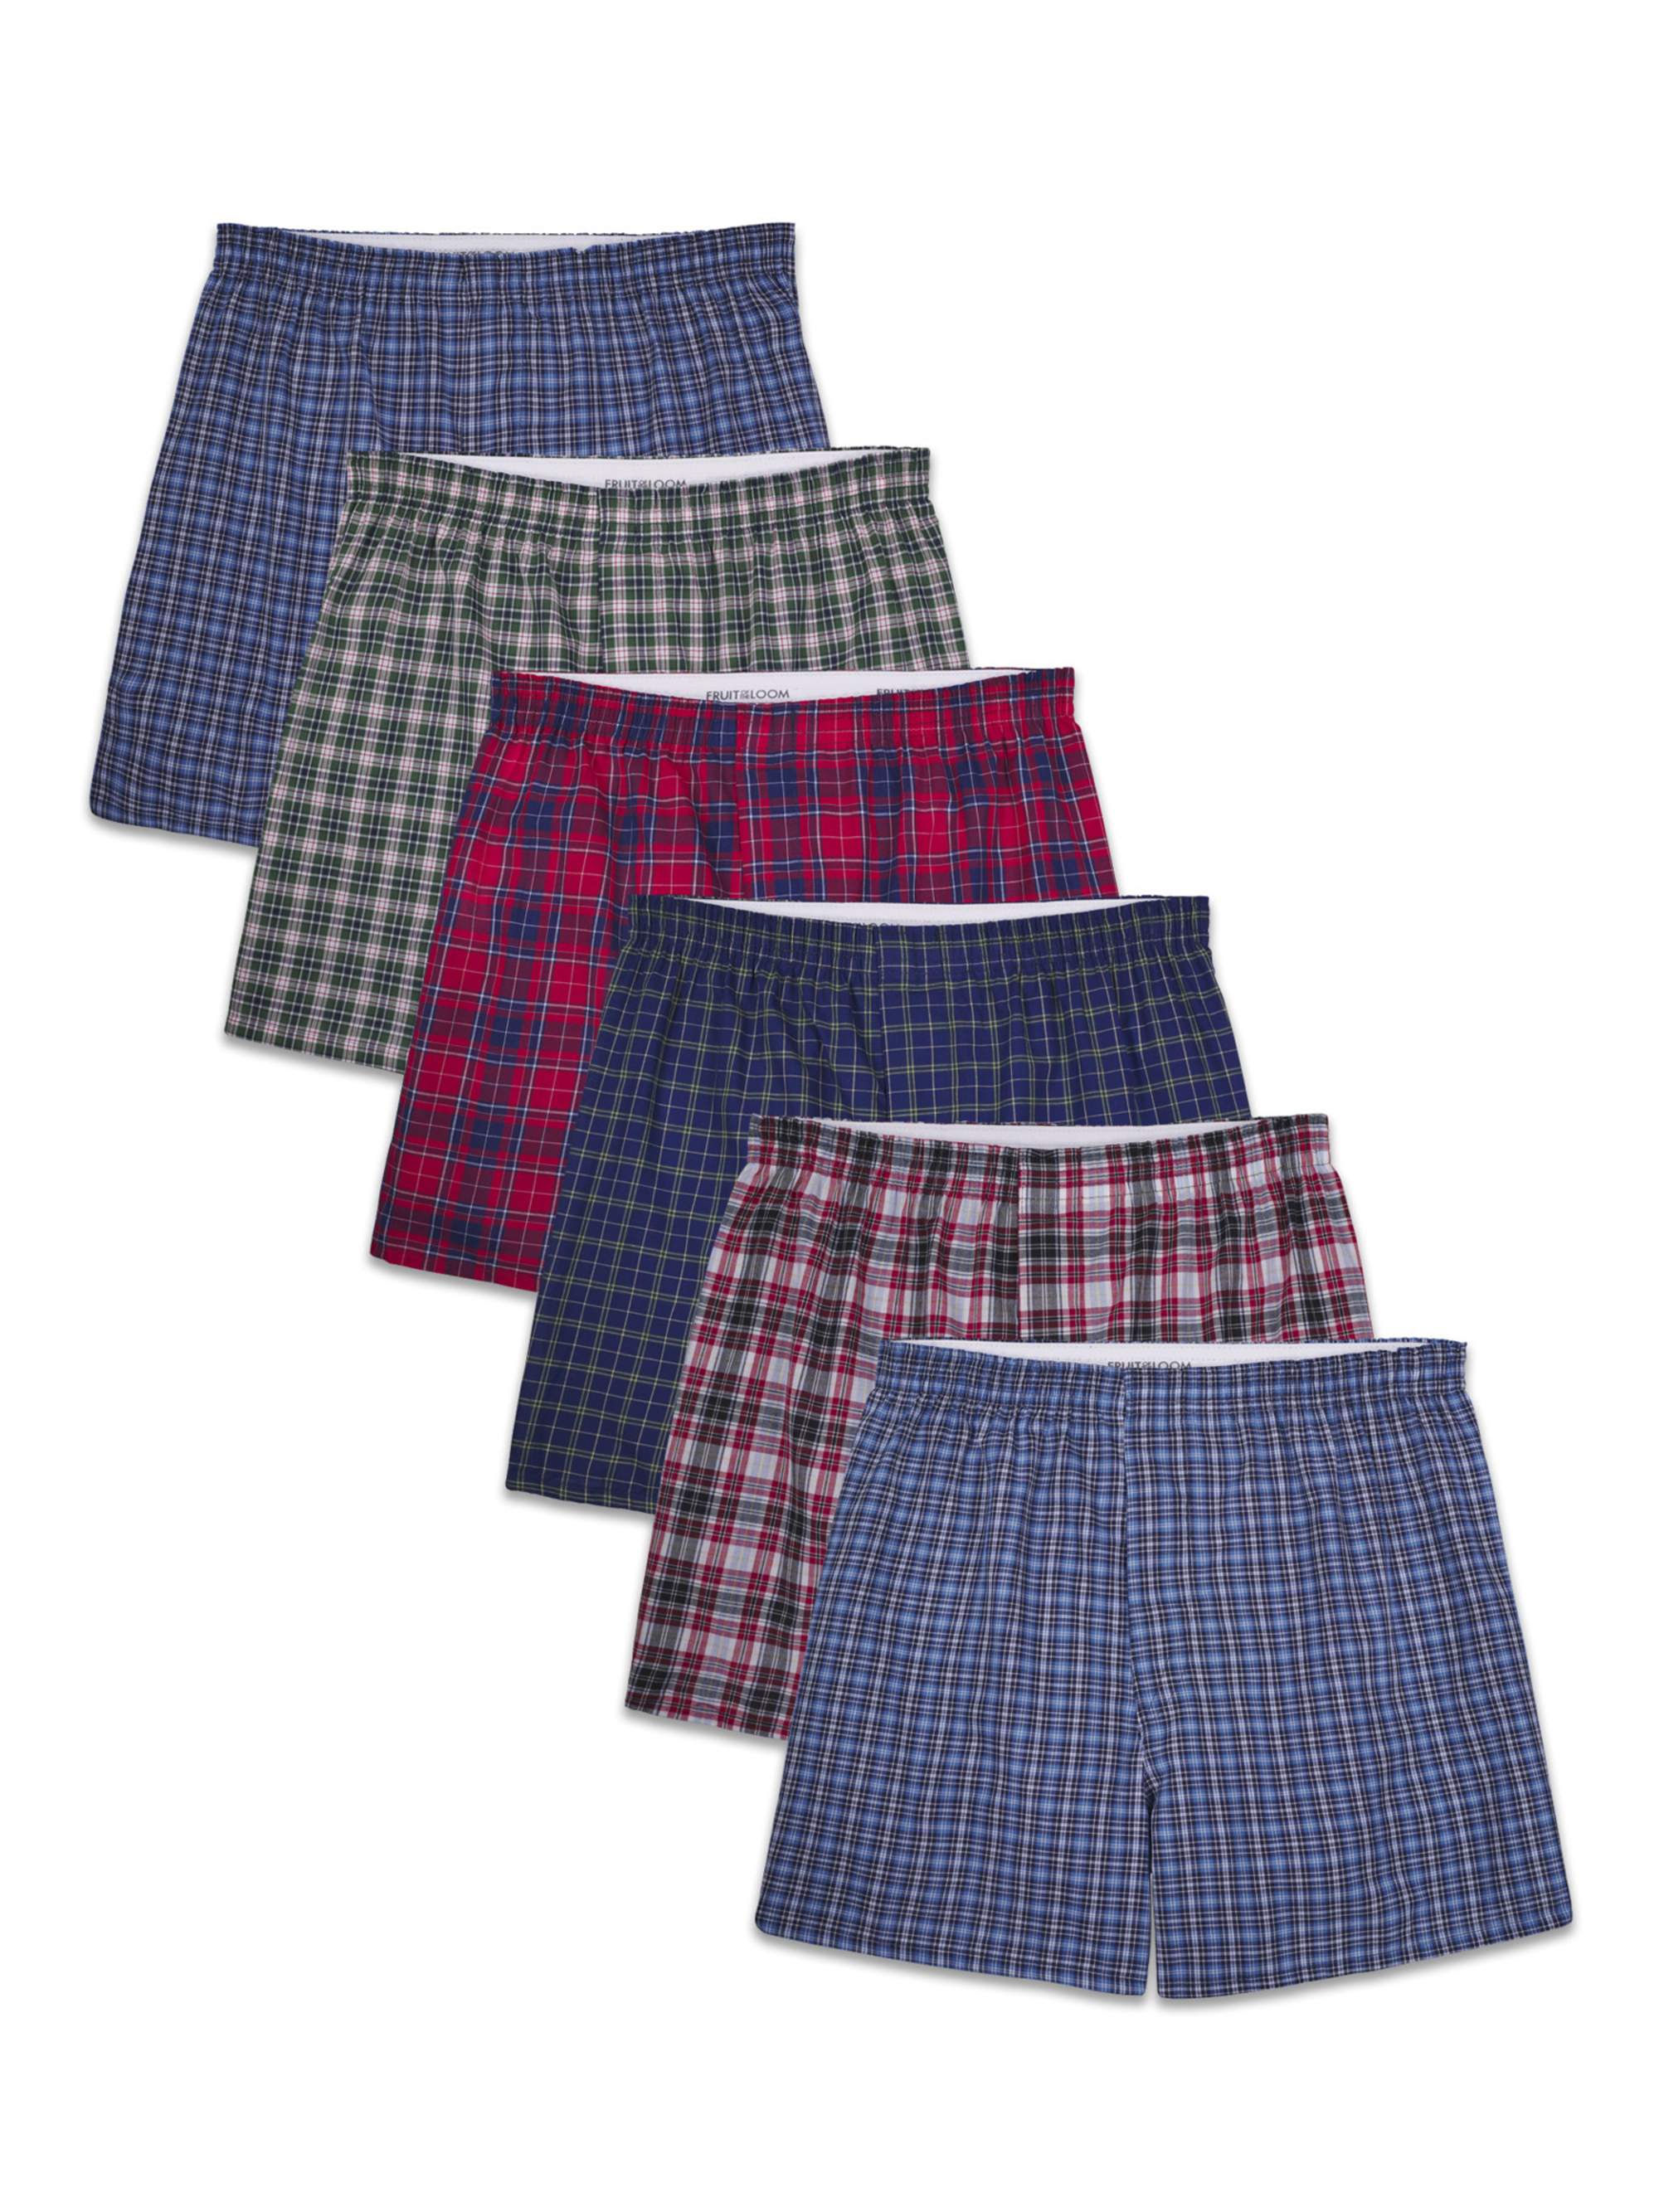 Fruit of the Loom Men's Woven Boxers, 6 Pack - image 1 of 12